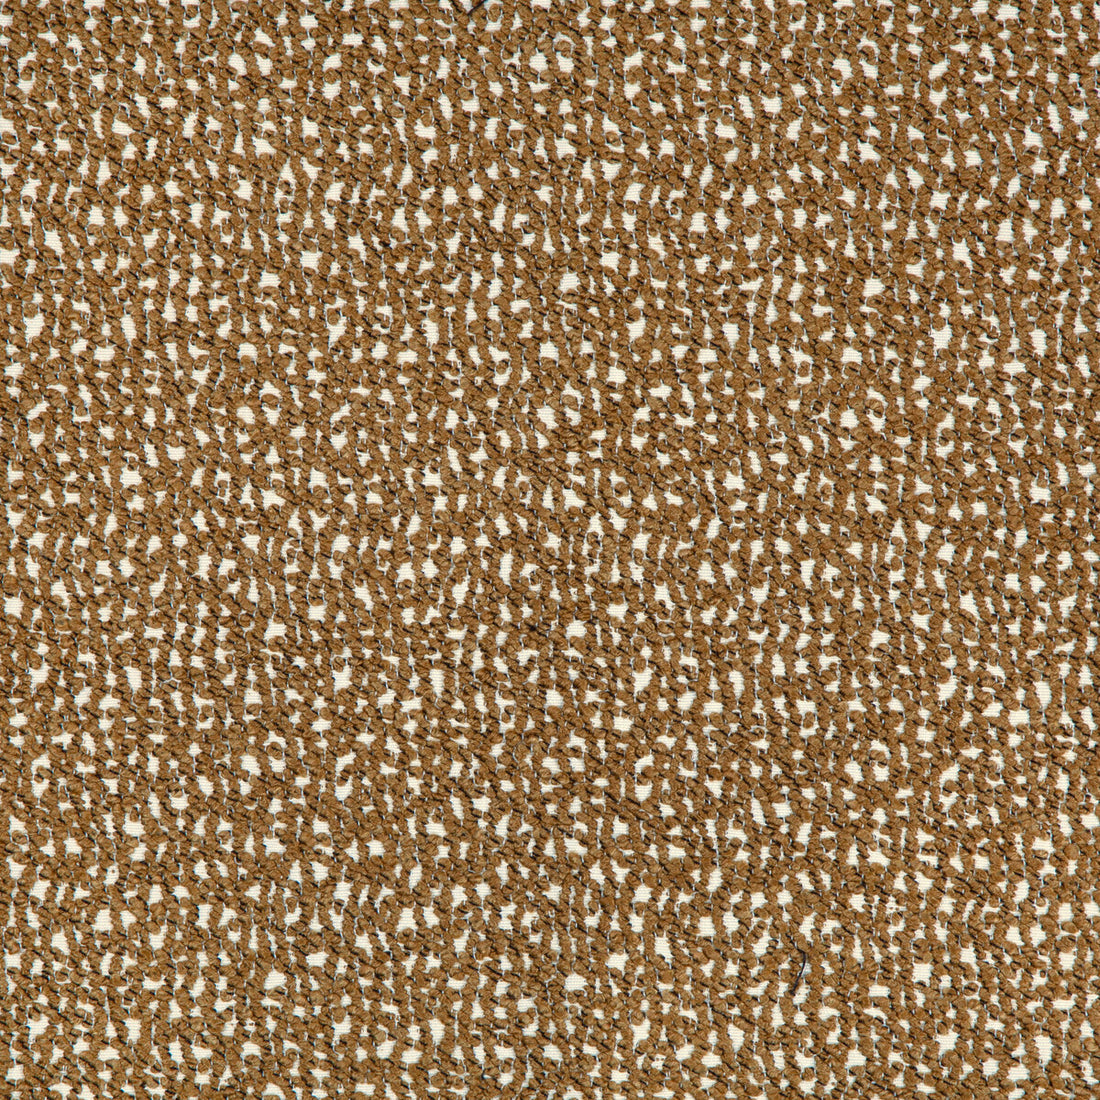 Serra fabric in tobacco color - pattern GWF-3783.612.0 - by Lee Jofa Modern in the Kelly Wearstler Oculum Indoor/Outdoor collection